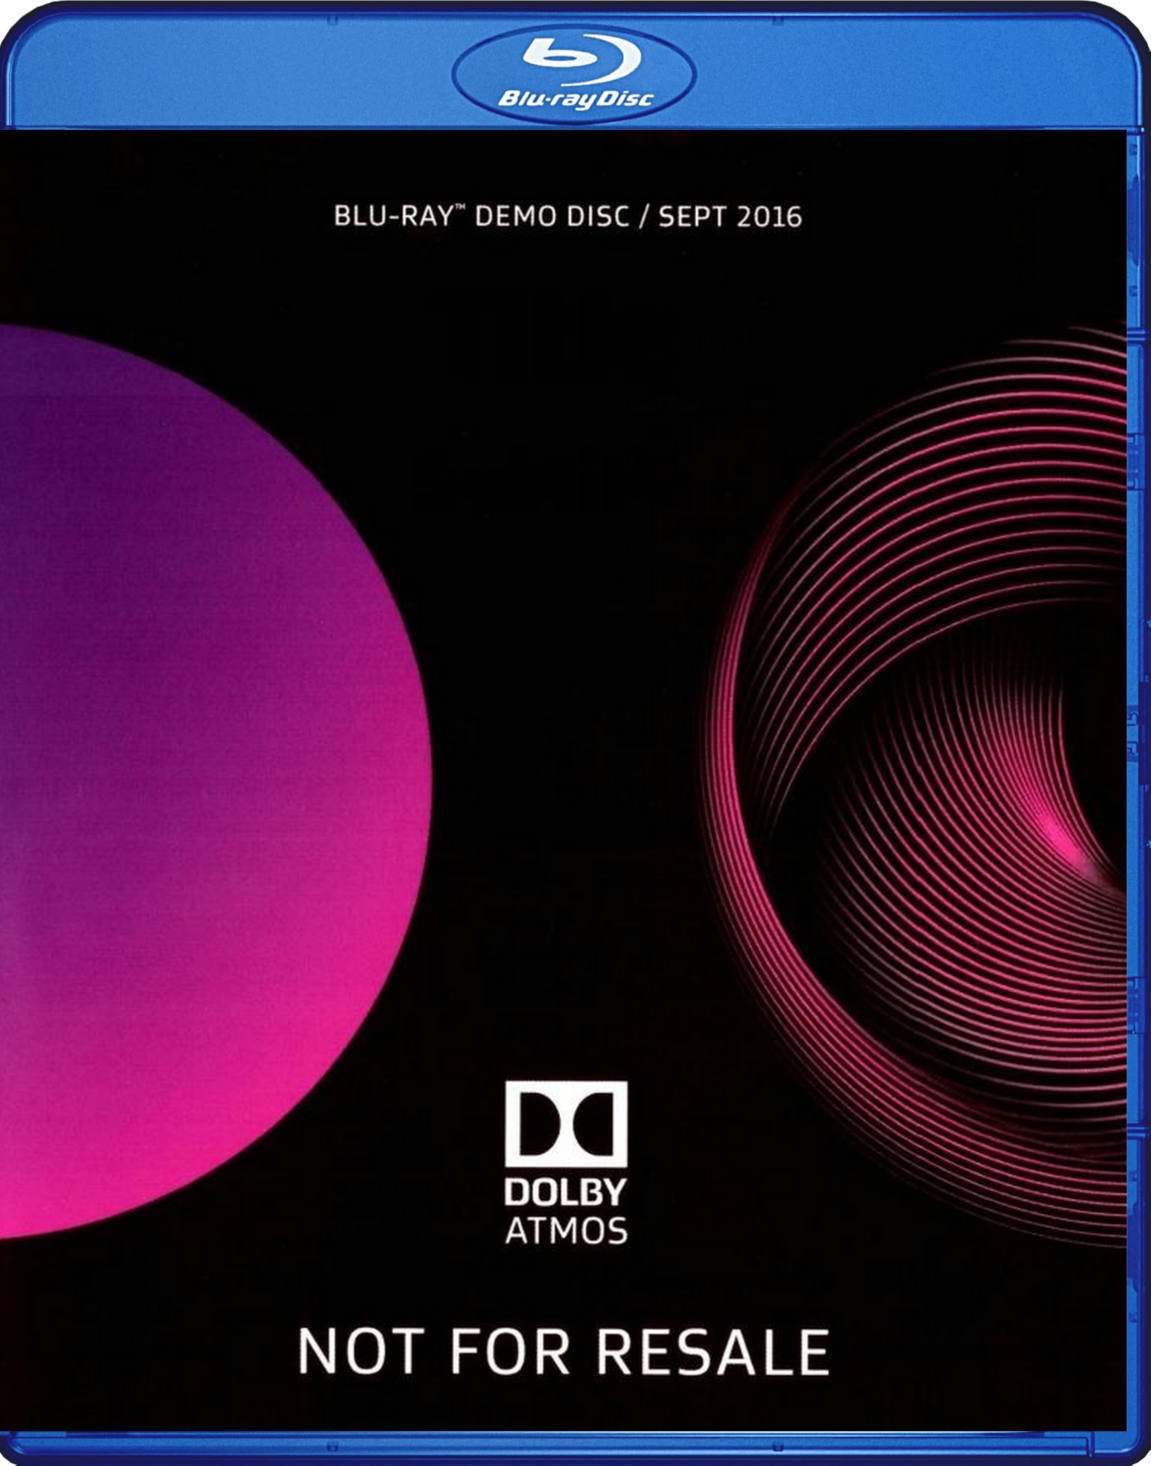 dolby atmos demo disc